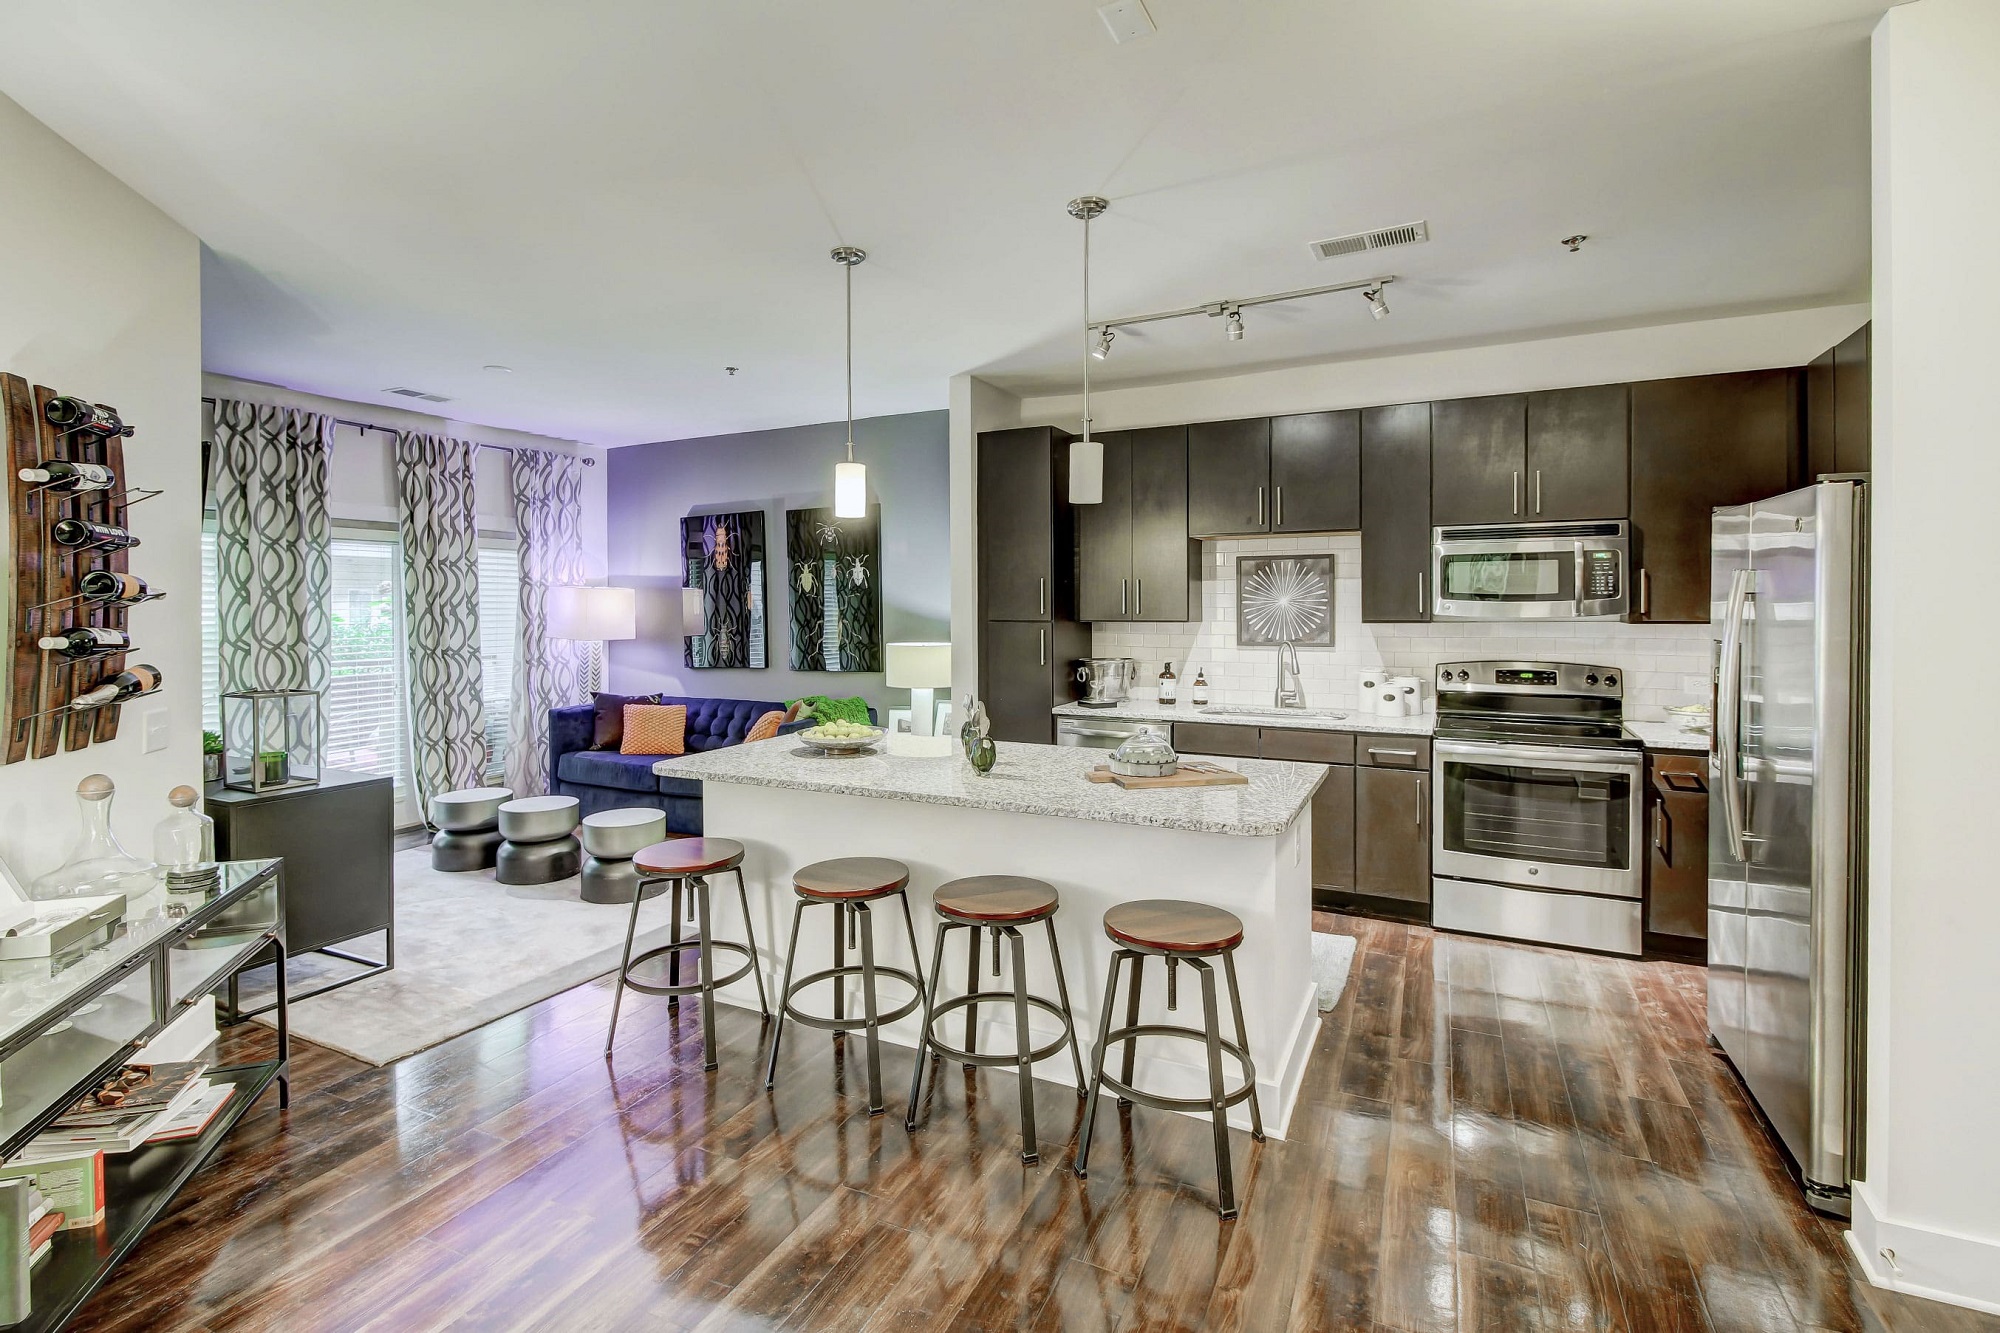 Furnished apartment with an open concept living room and kitchen including wood floors throughout, pendant and track lighting, dark cabinetry, stainless steel appliances, granite countertops, and an island with barstool seating